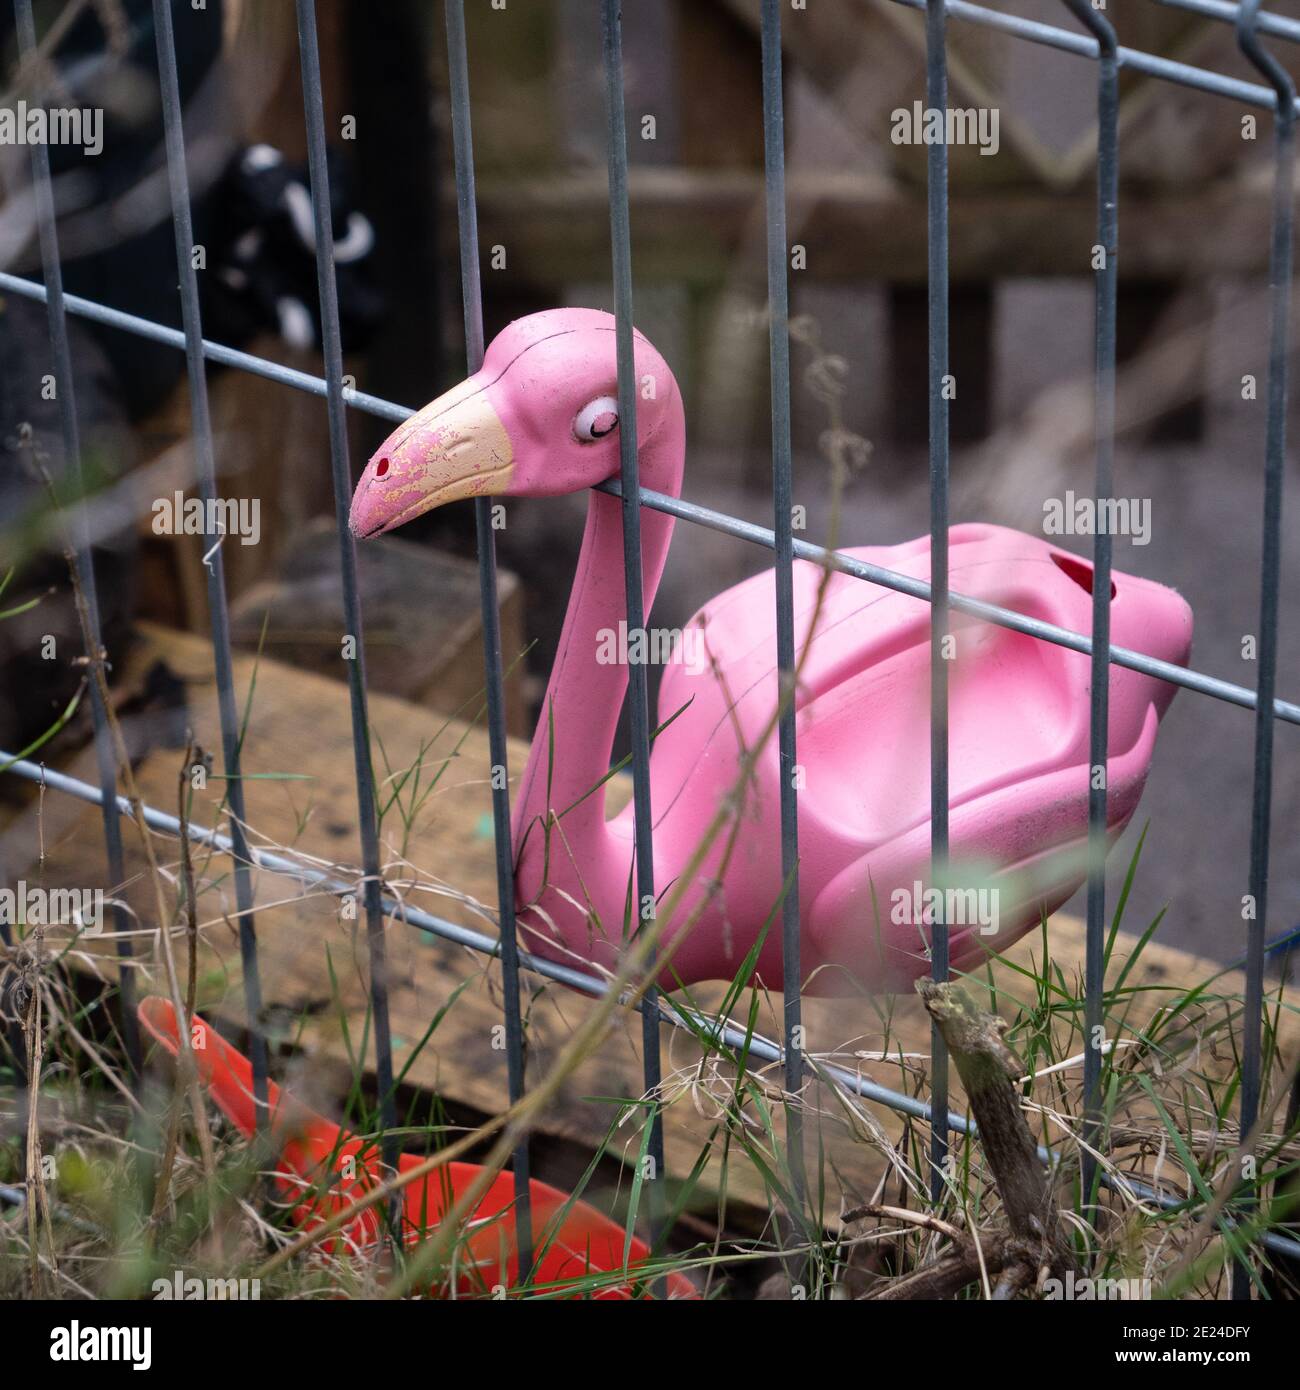 Help, let me out! A toy flamingo trying to escape from a local nursery at Leigh Park Community Centre, Westbury, Wiltshire, England, UK. Stock Photo